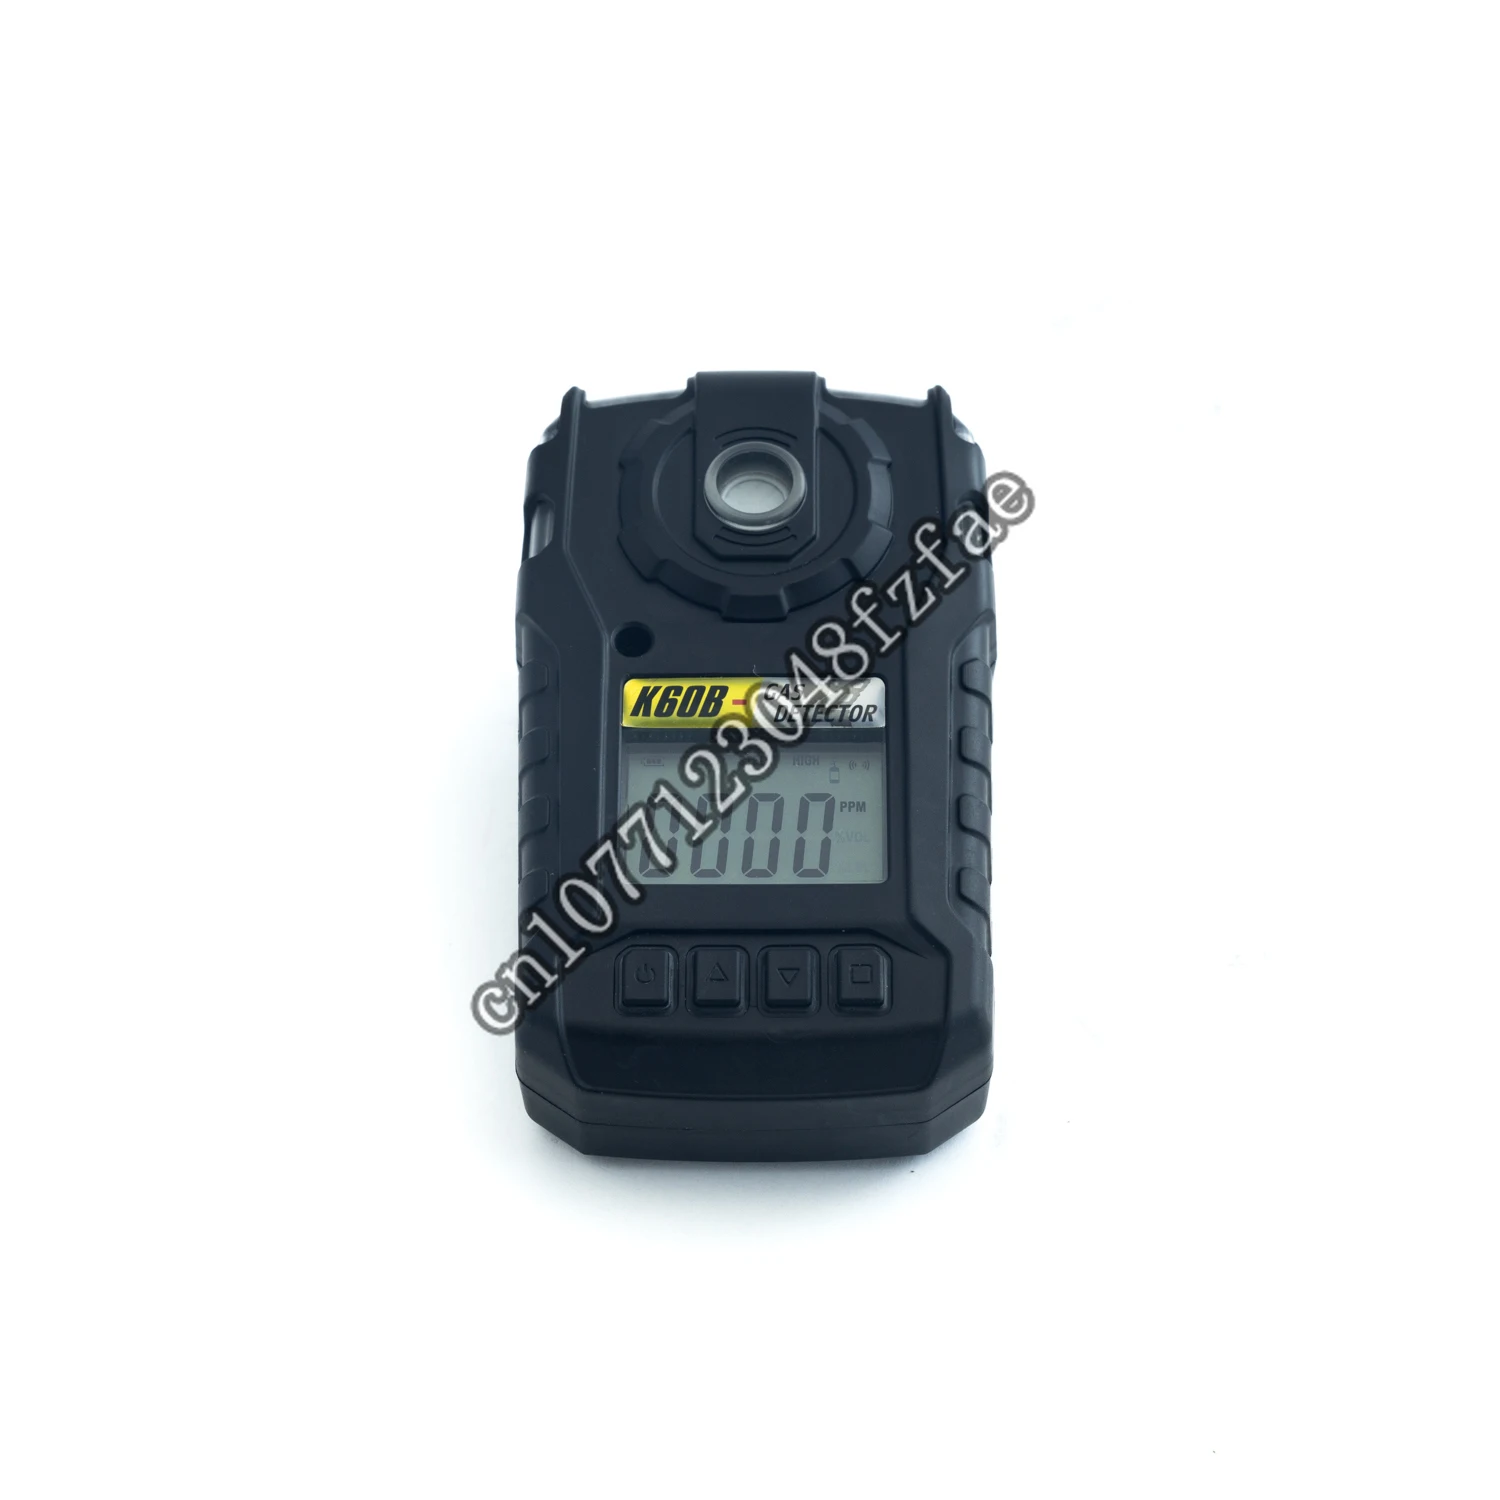 H2 Sensor Battery Powered Hydrogen Portable Gas Detector for Industrial Safety